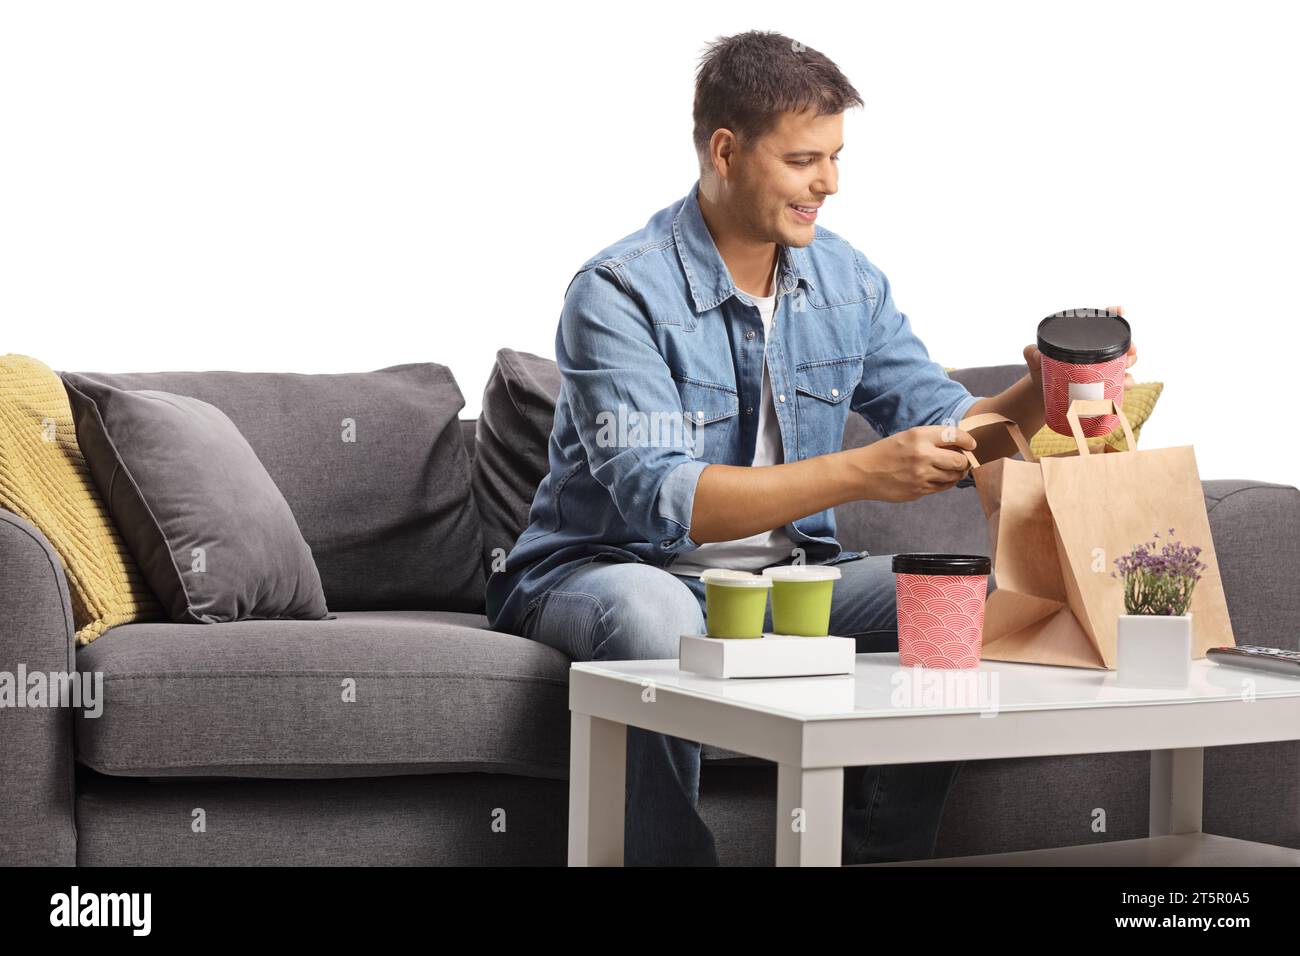 Man smiling and sitting on a sofa with delivery food on a table Stock Photo